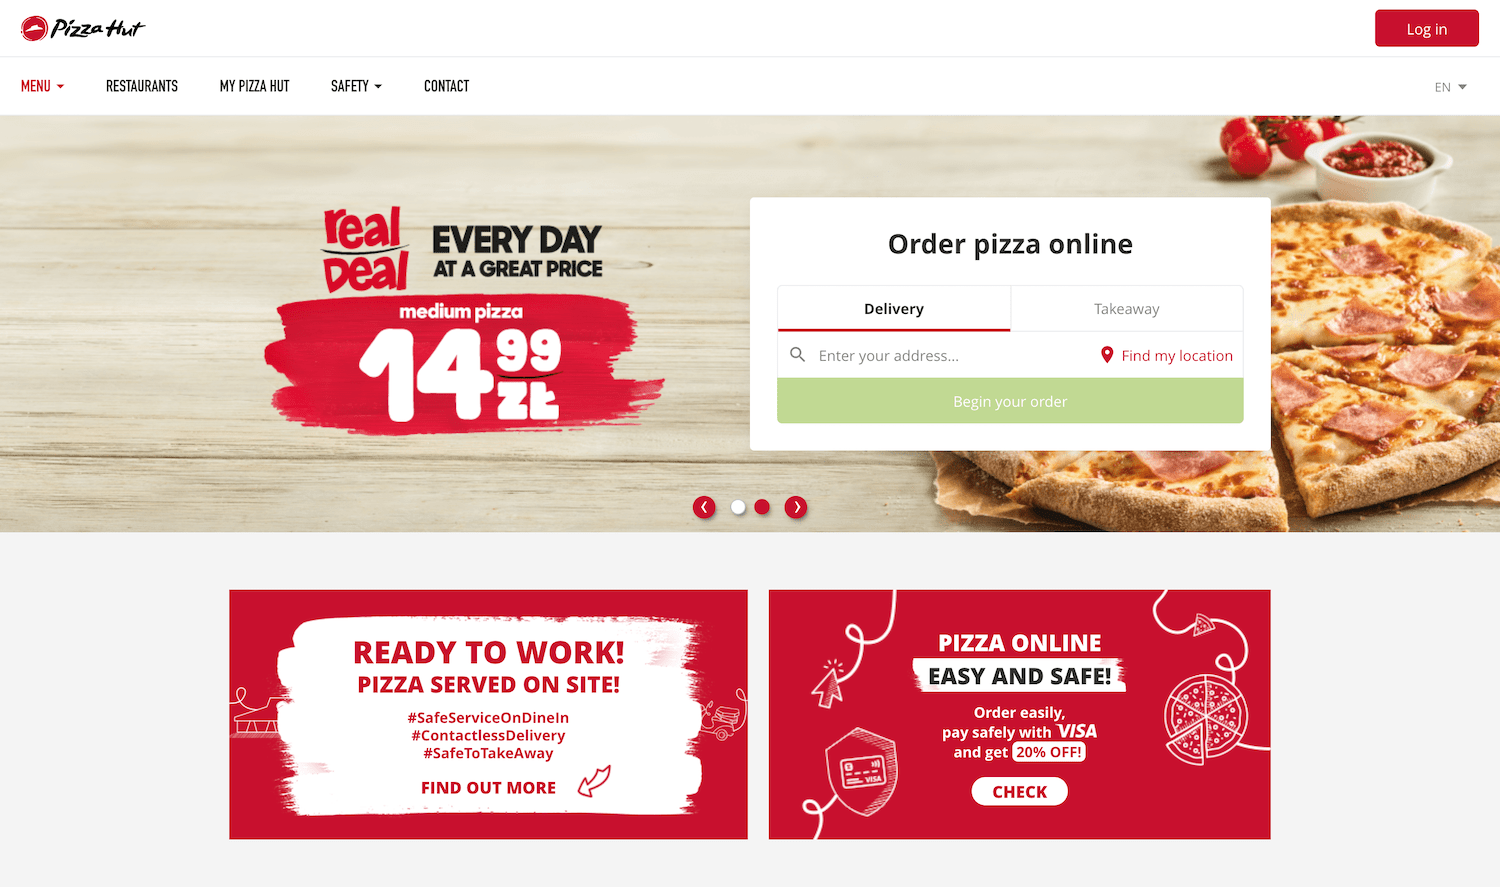 pizza-hut-browser-view